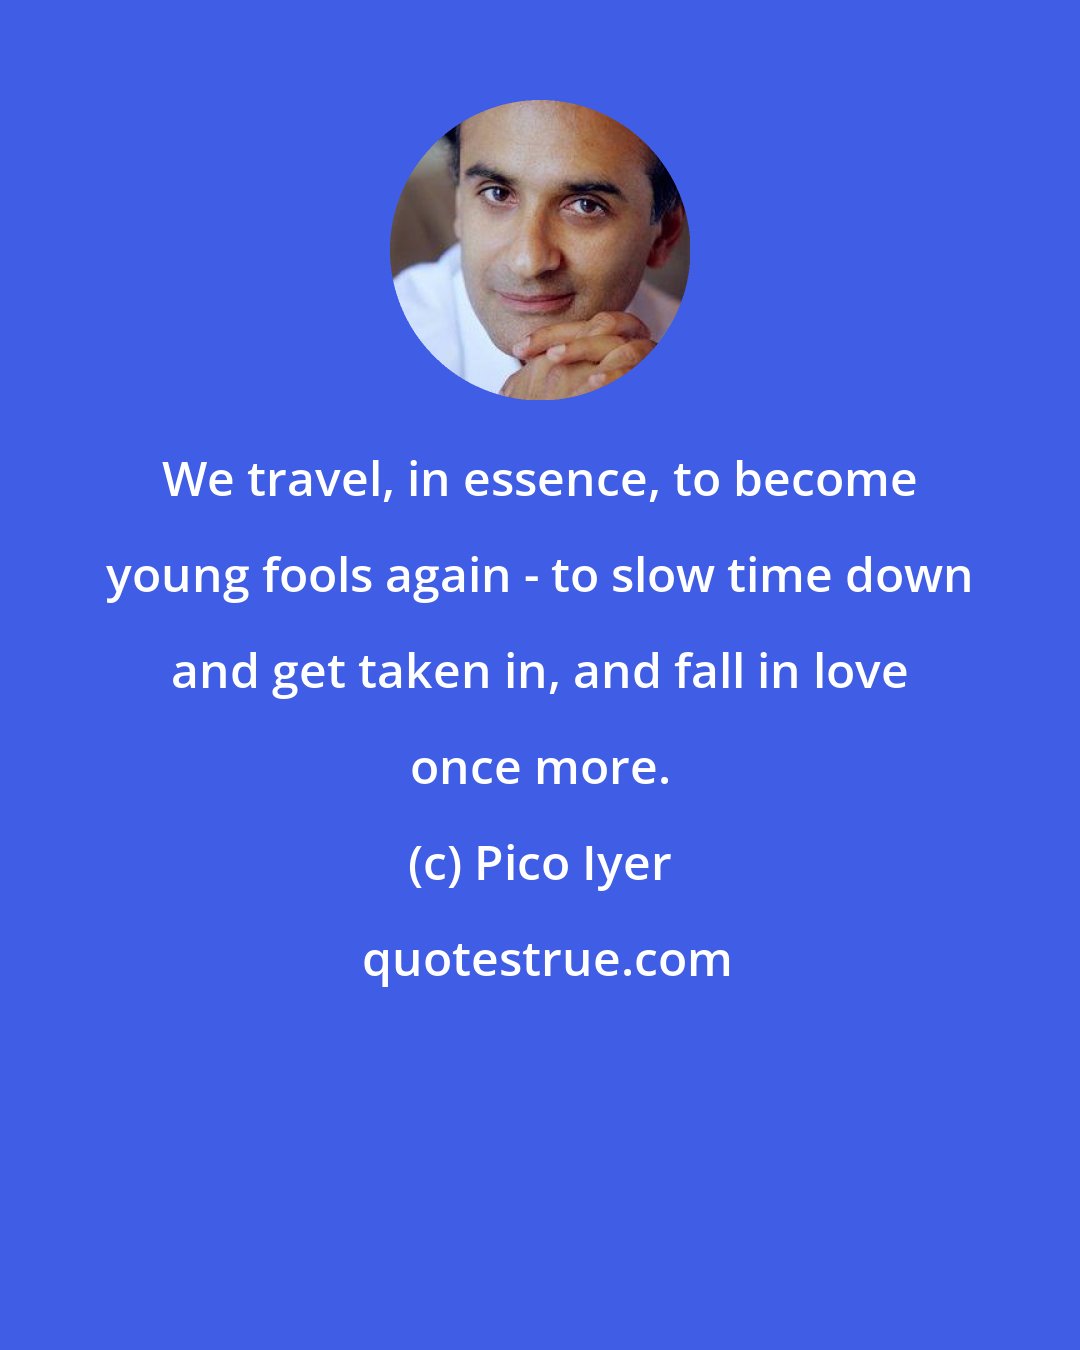 Pico Iyer: We travel, in essence, to become young fools again - to slow time down and get taken in, and fall in love once more.